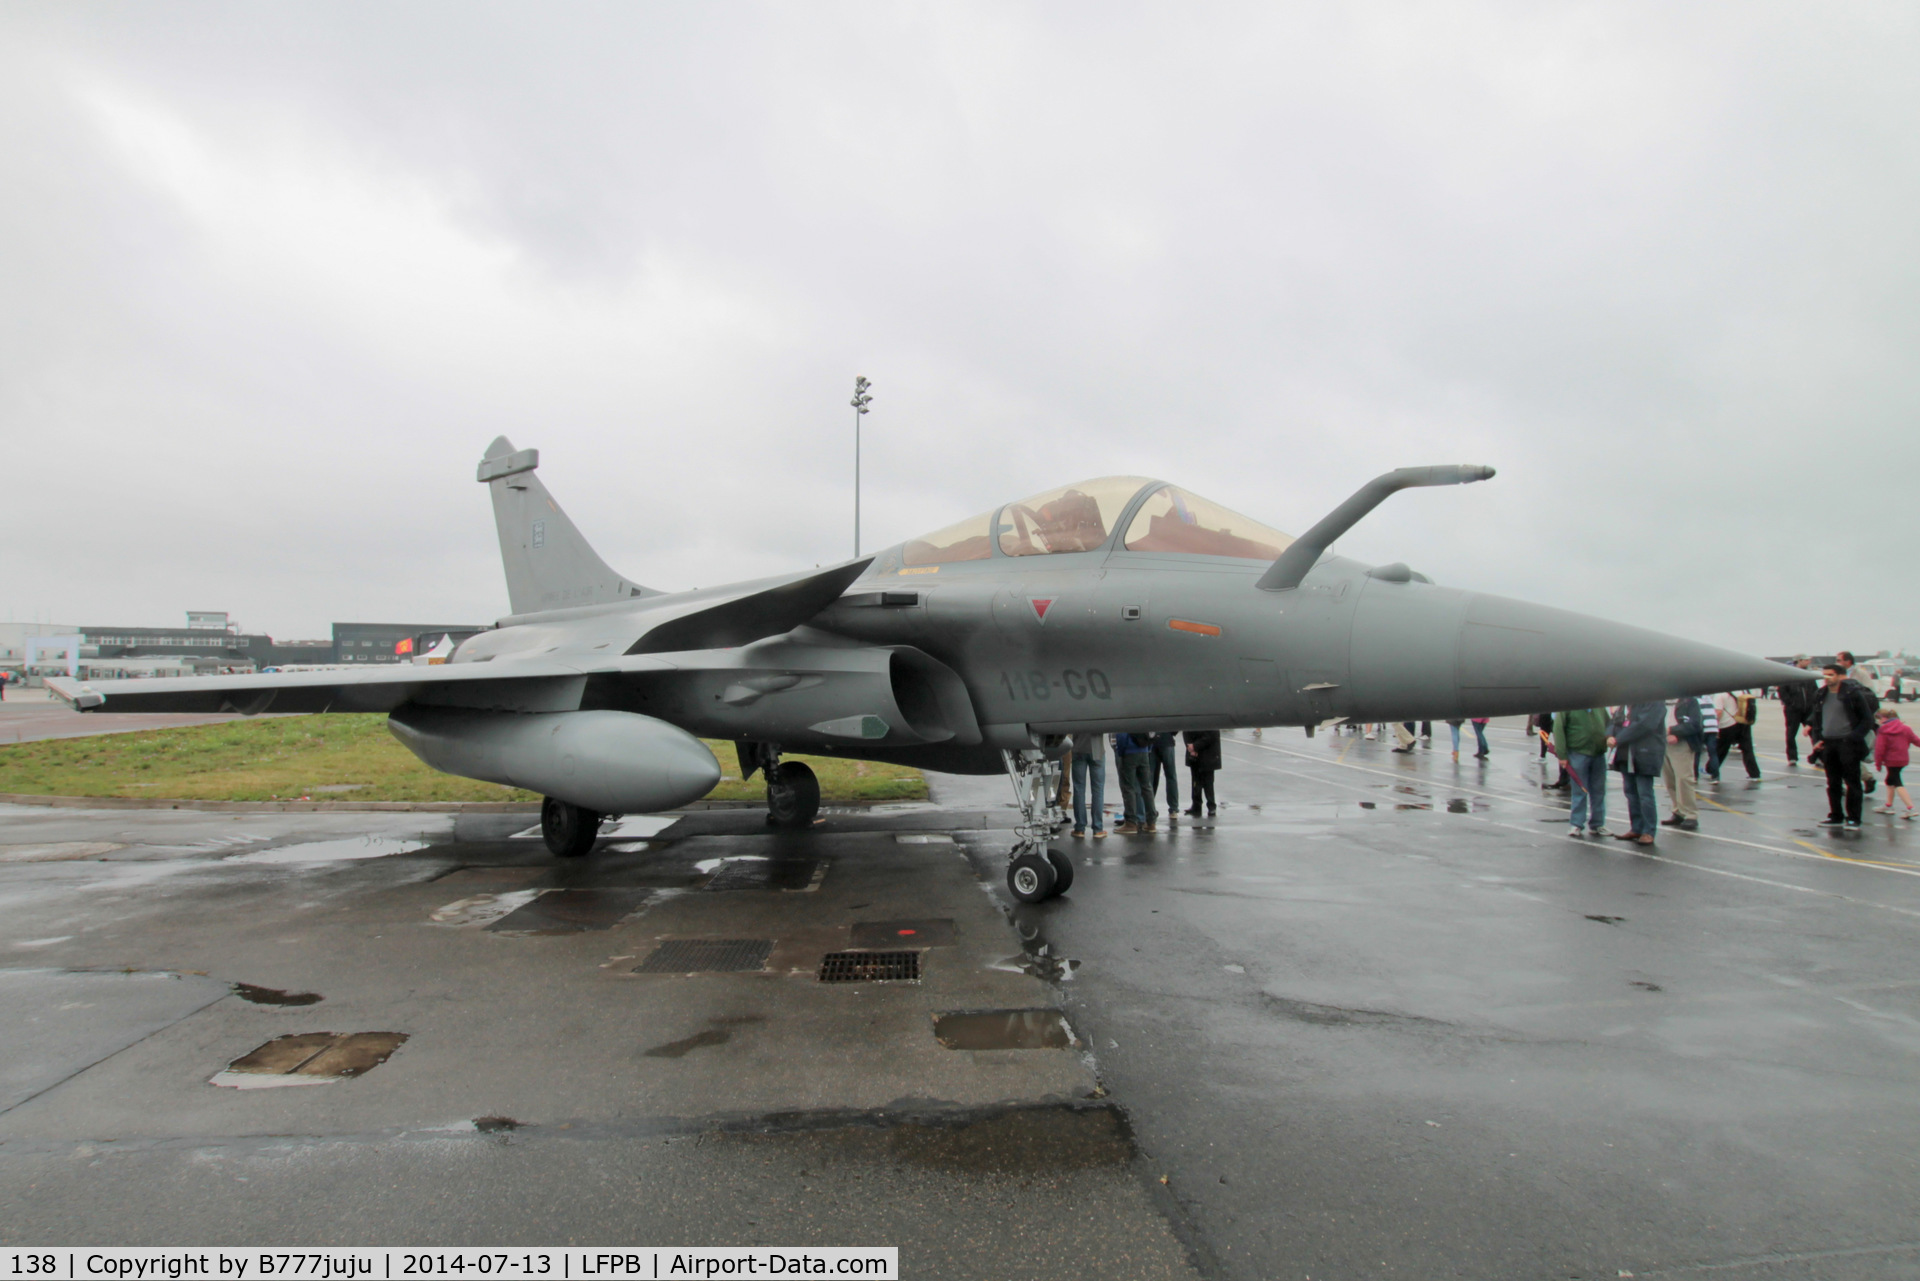 138, Dassault Rafale C C/N 138, at 100th anniversary of Le Bourget Airport, new code 118-GQ